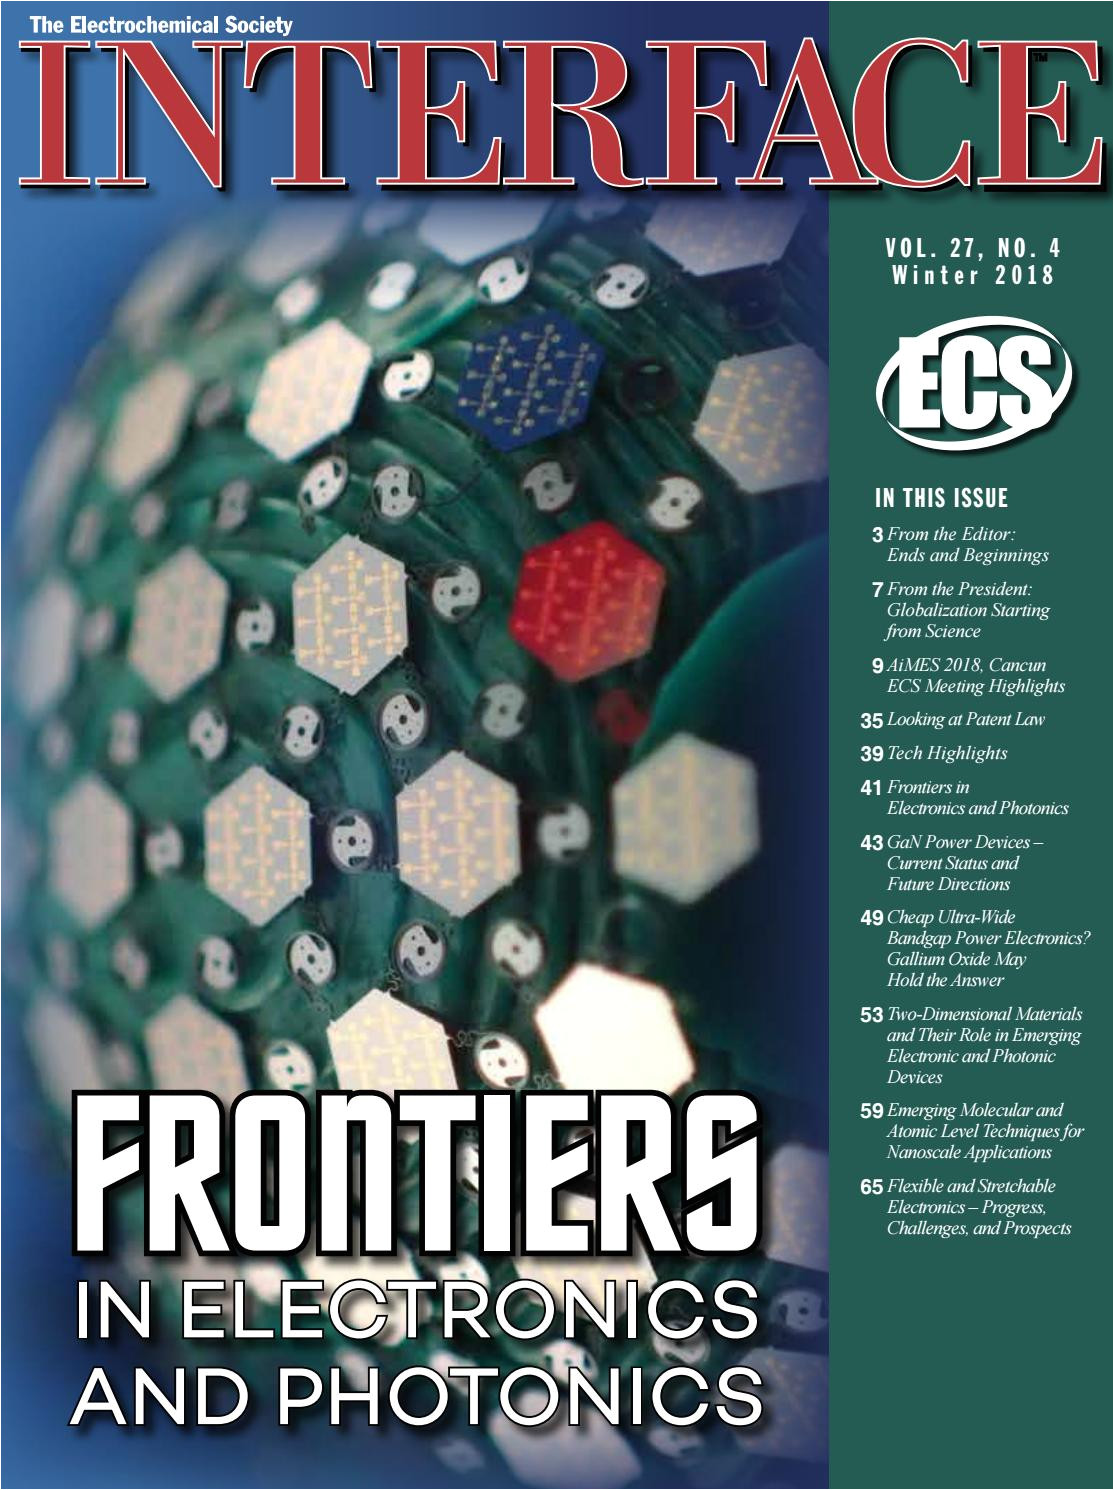 interface vol 27 no winter 2018 by the electrochemical society issuu